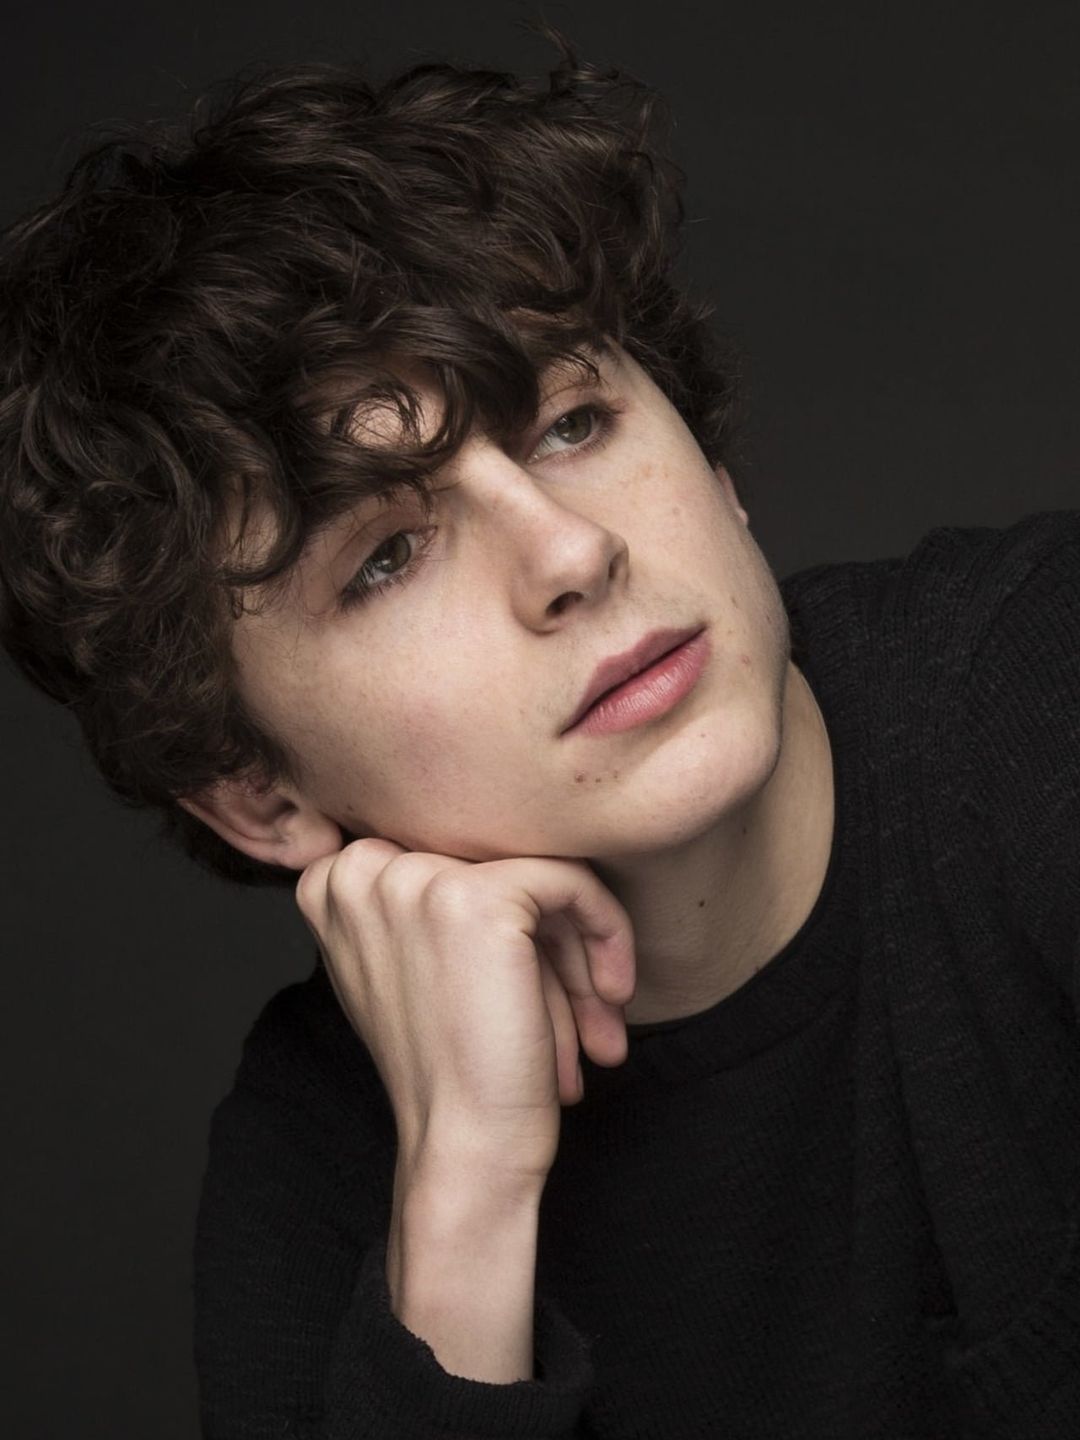 Timothee Chalamet story of success